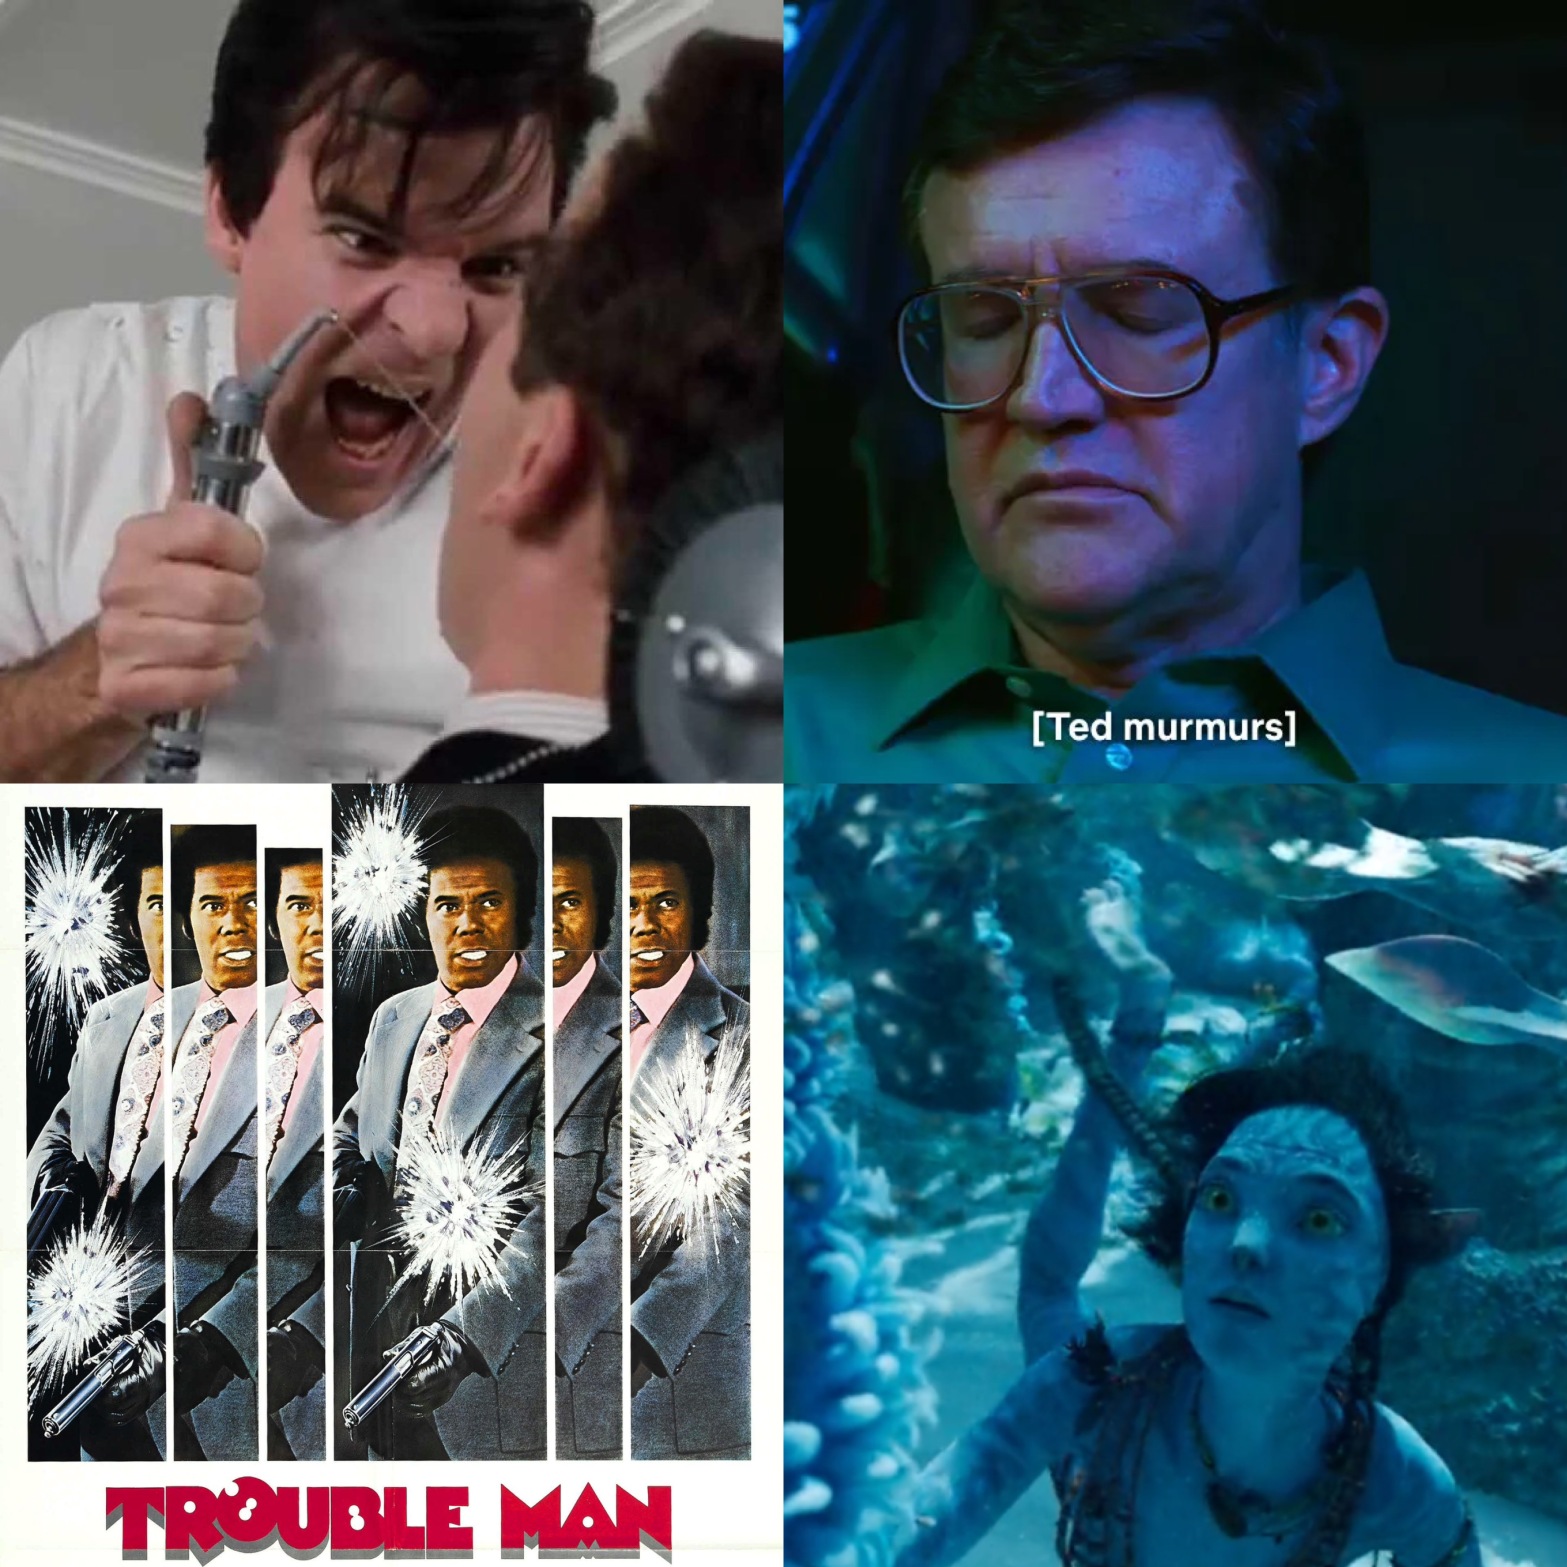 Steve Martin as the dentist from Little Shop of Horrors, the dad from Stranger Things, a poster for the movie Trouble Man, and an alien from Avatar The Way of Water.